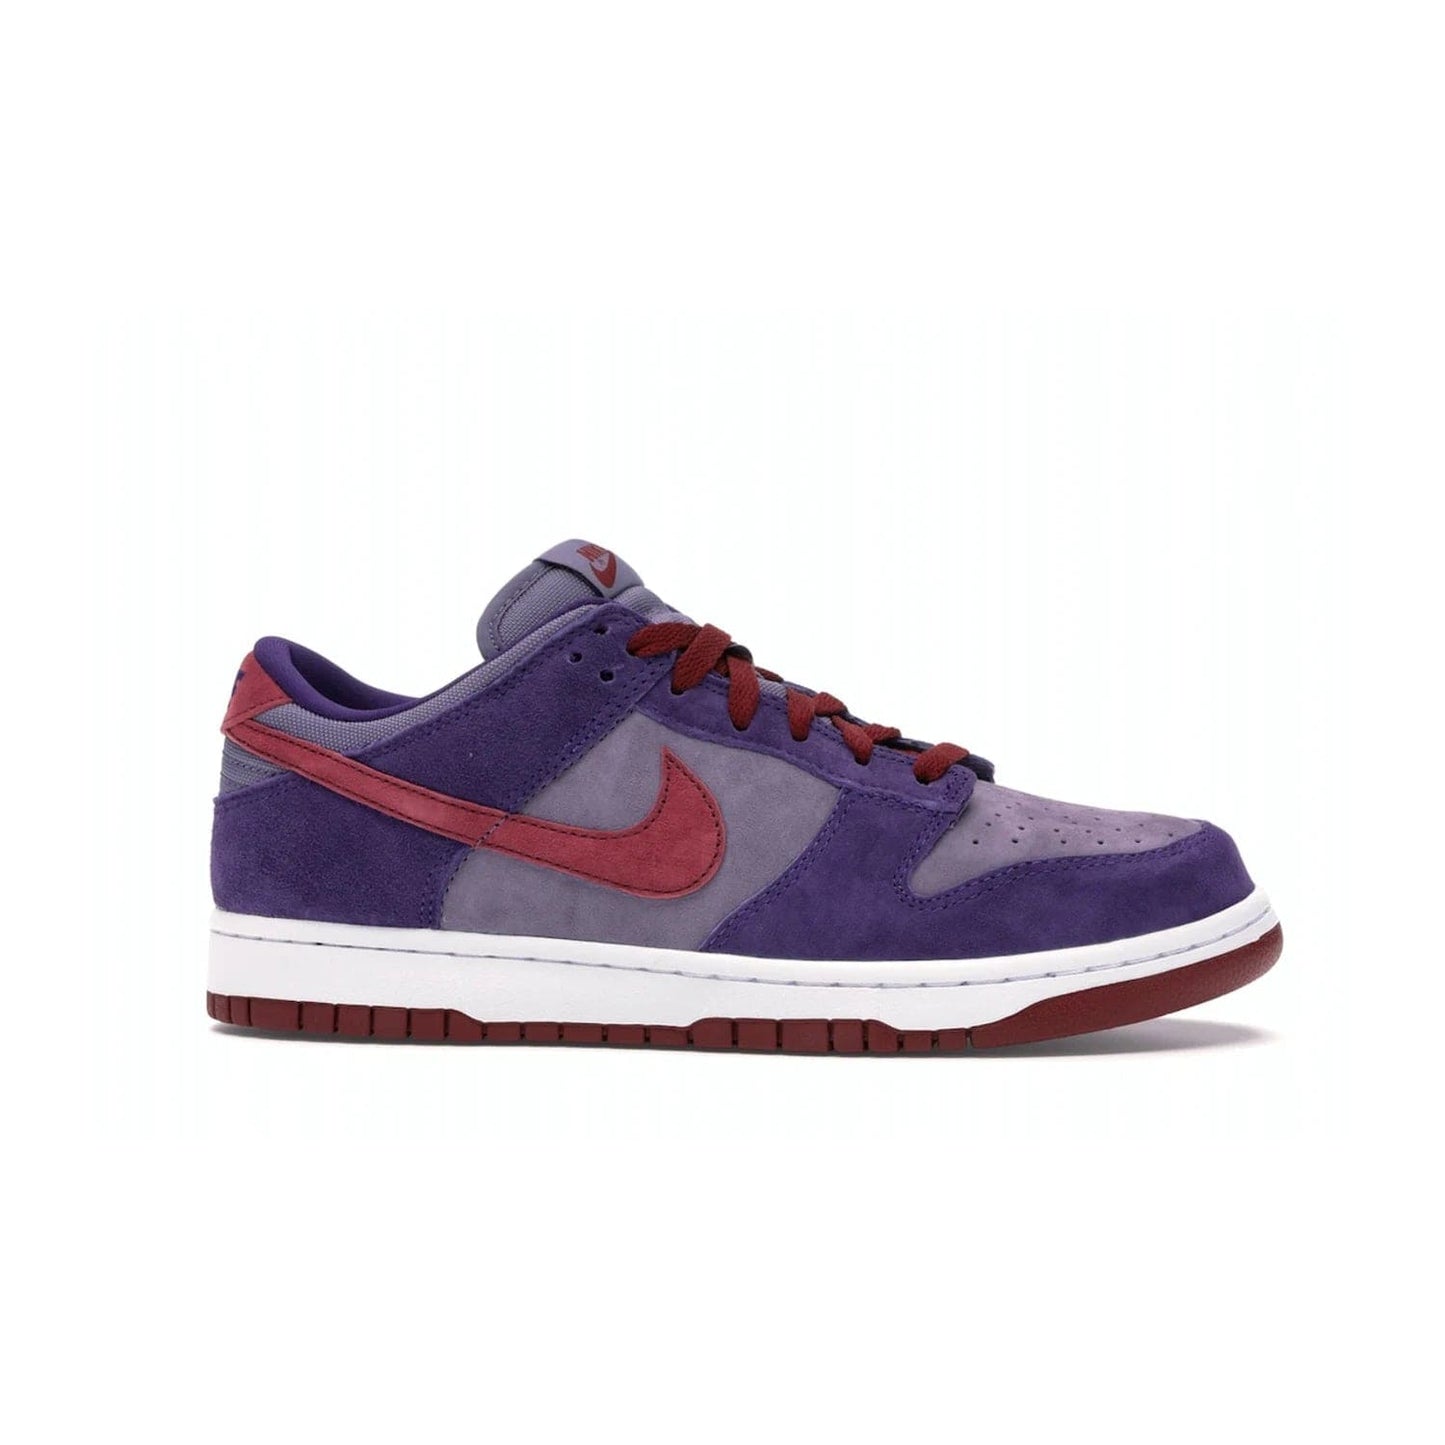 Nike Dunk Low Plum (2020) - Image 2 - Only at www.BallersClubKickz.com - Elevate your look with the Nike Dunk Low Plum (2020). Featuring a bold purple colorway, this retro-inspired silhouette is constructed of premium suede and makes for a must-have for any sneakerhead.